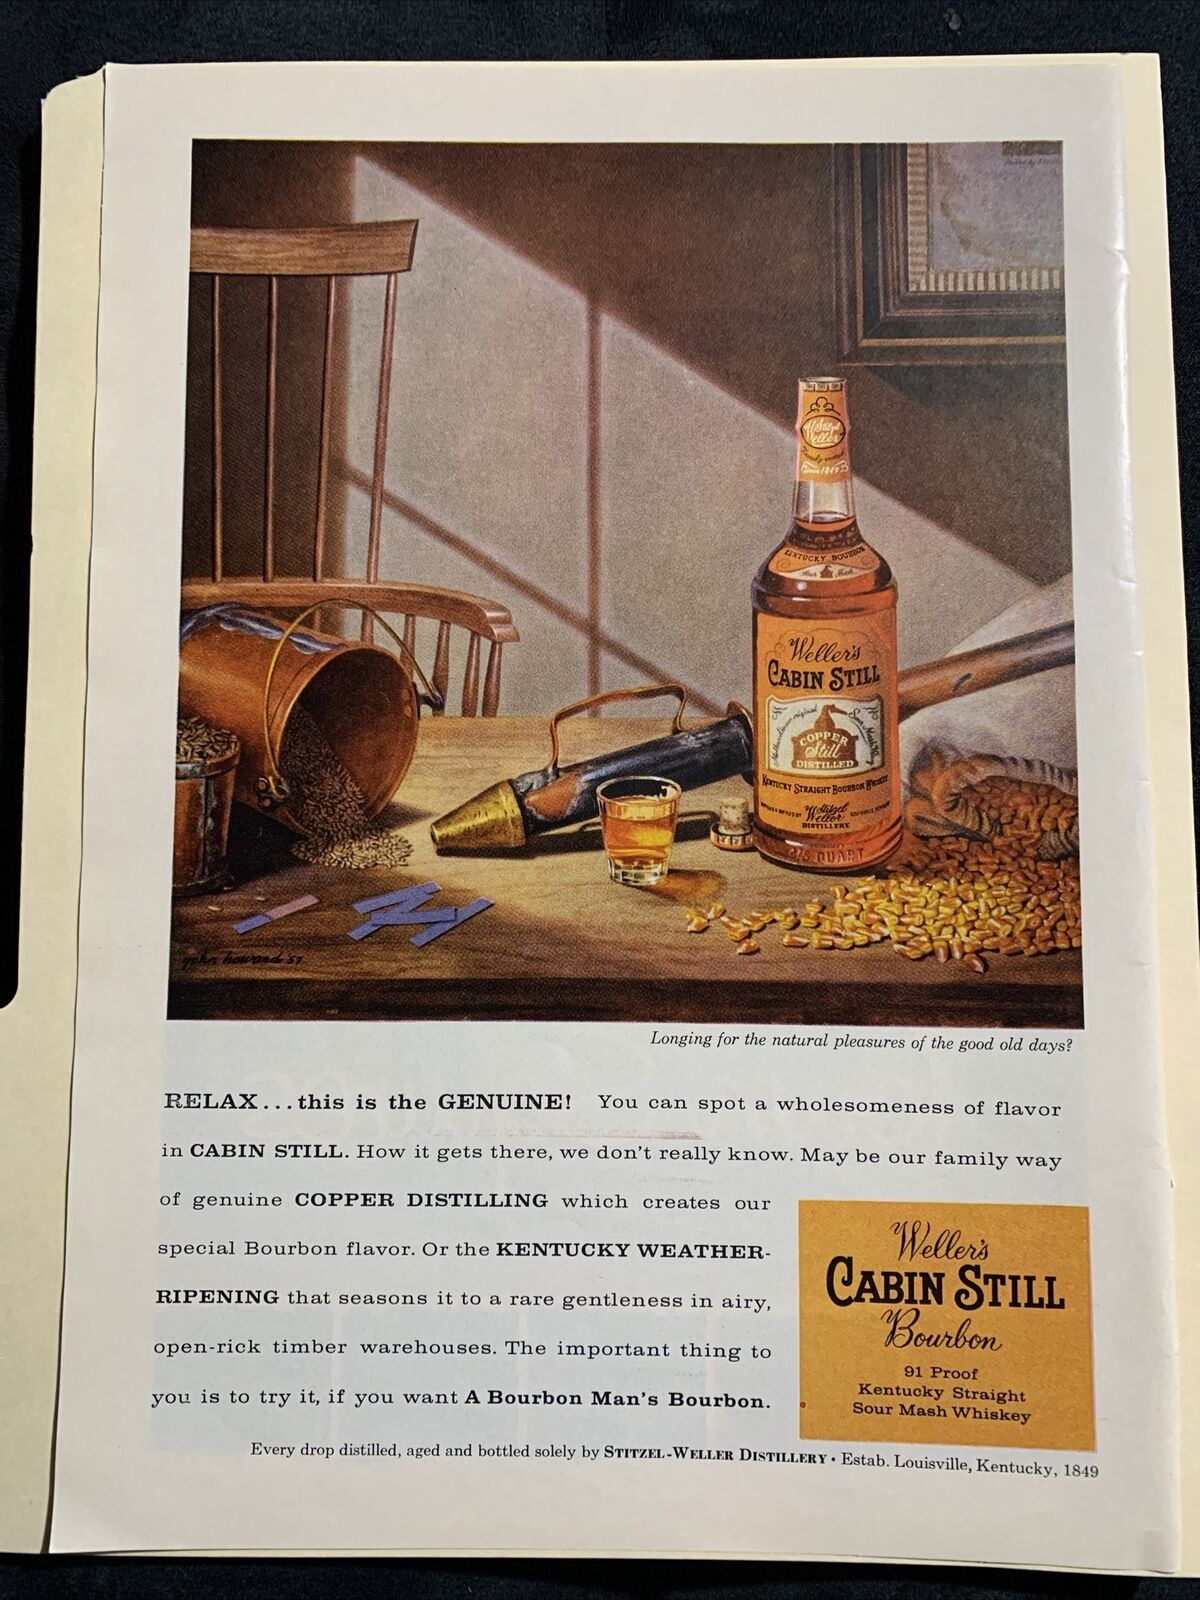 Illustrated vintage advertisement for Wellers Cabin Still Whiskey by John C Howard